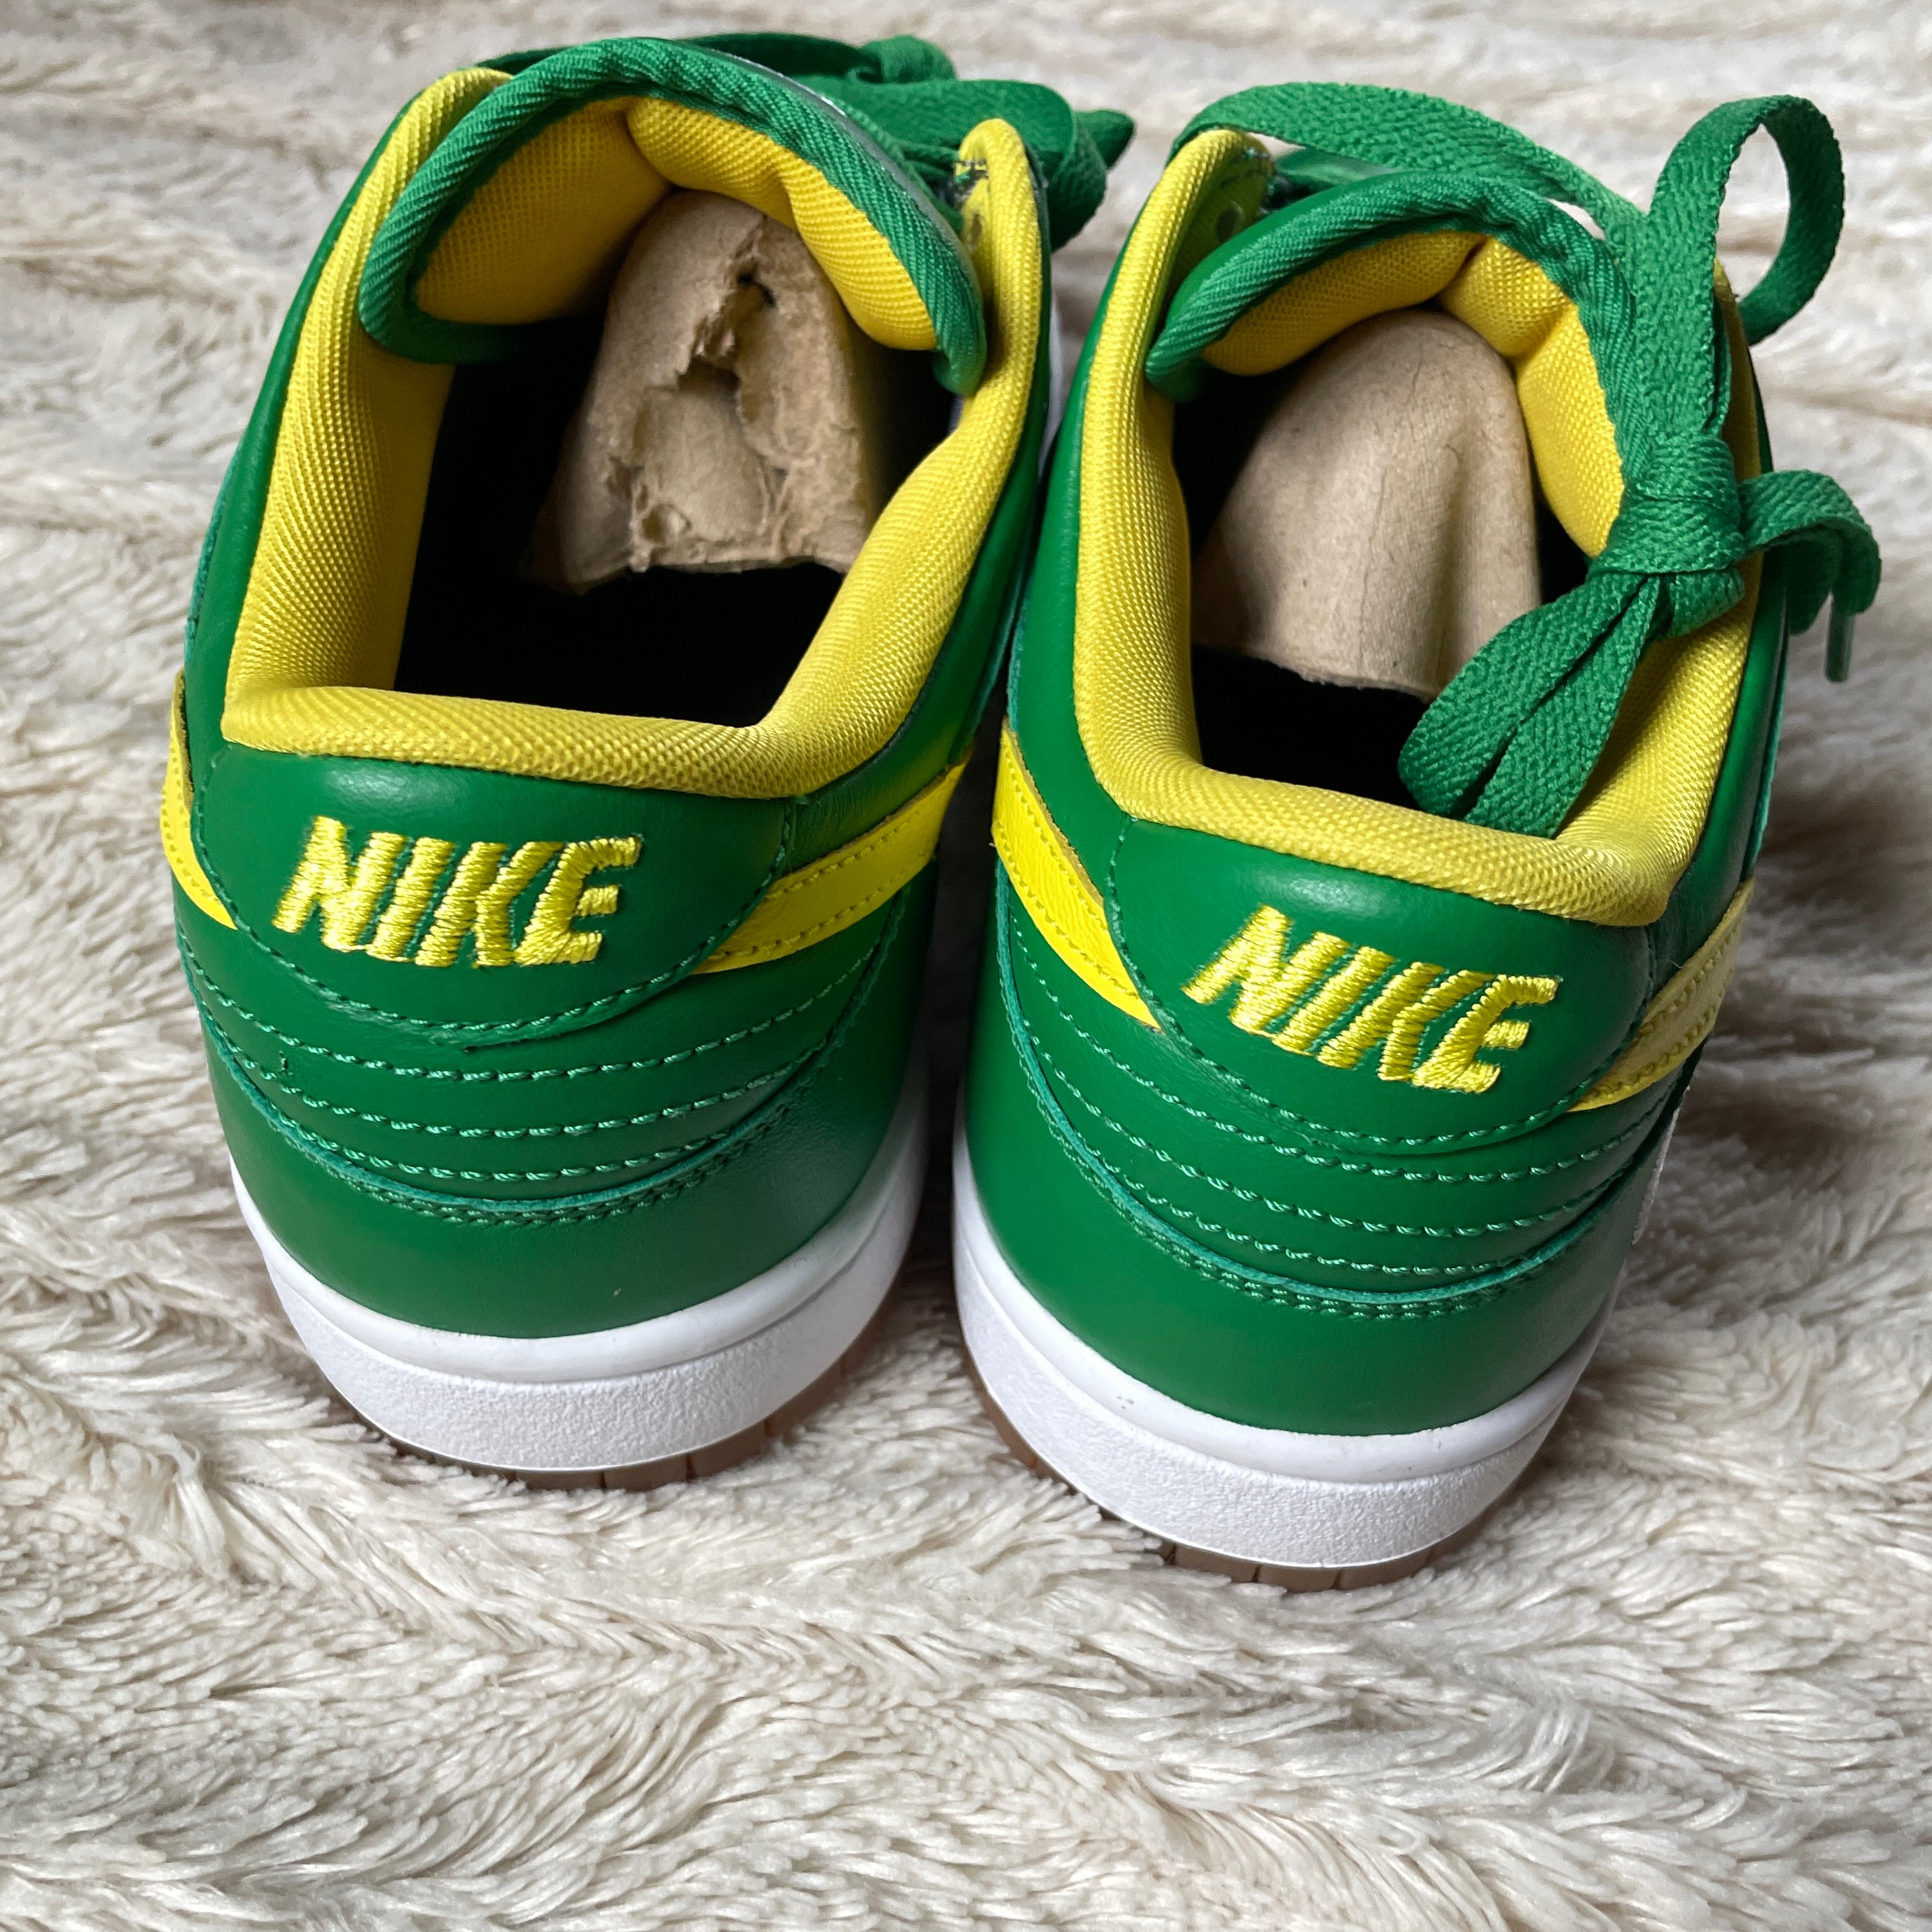 US 9.5 - NIKE DUNK LOW ID COLLEGE PACK "OREGON GREEN" [2017]